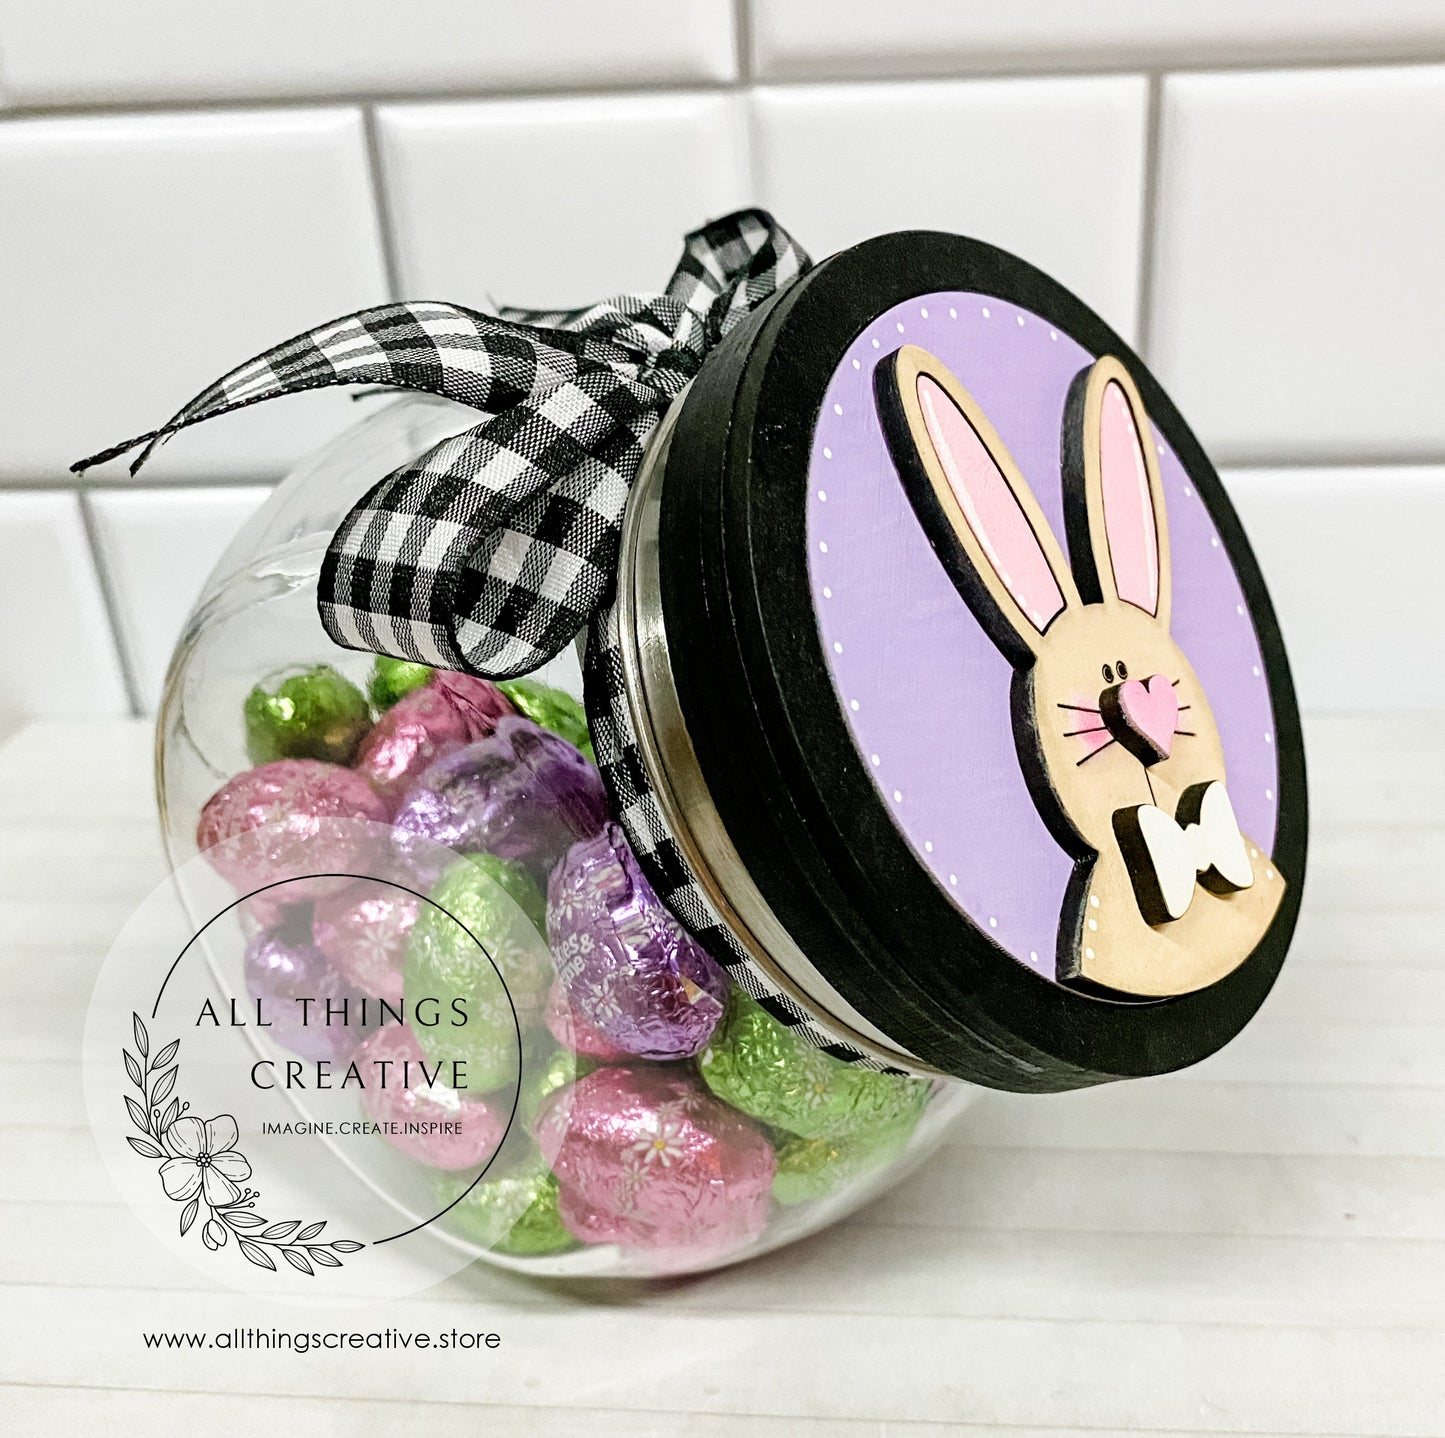 Glass Candy Jar Container with Removable Lid and a 3 inch Easter Bunny Interchangeable Circle Insert.